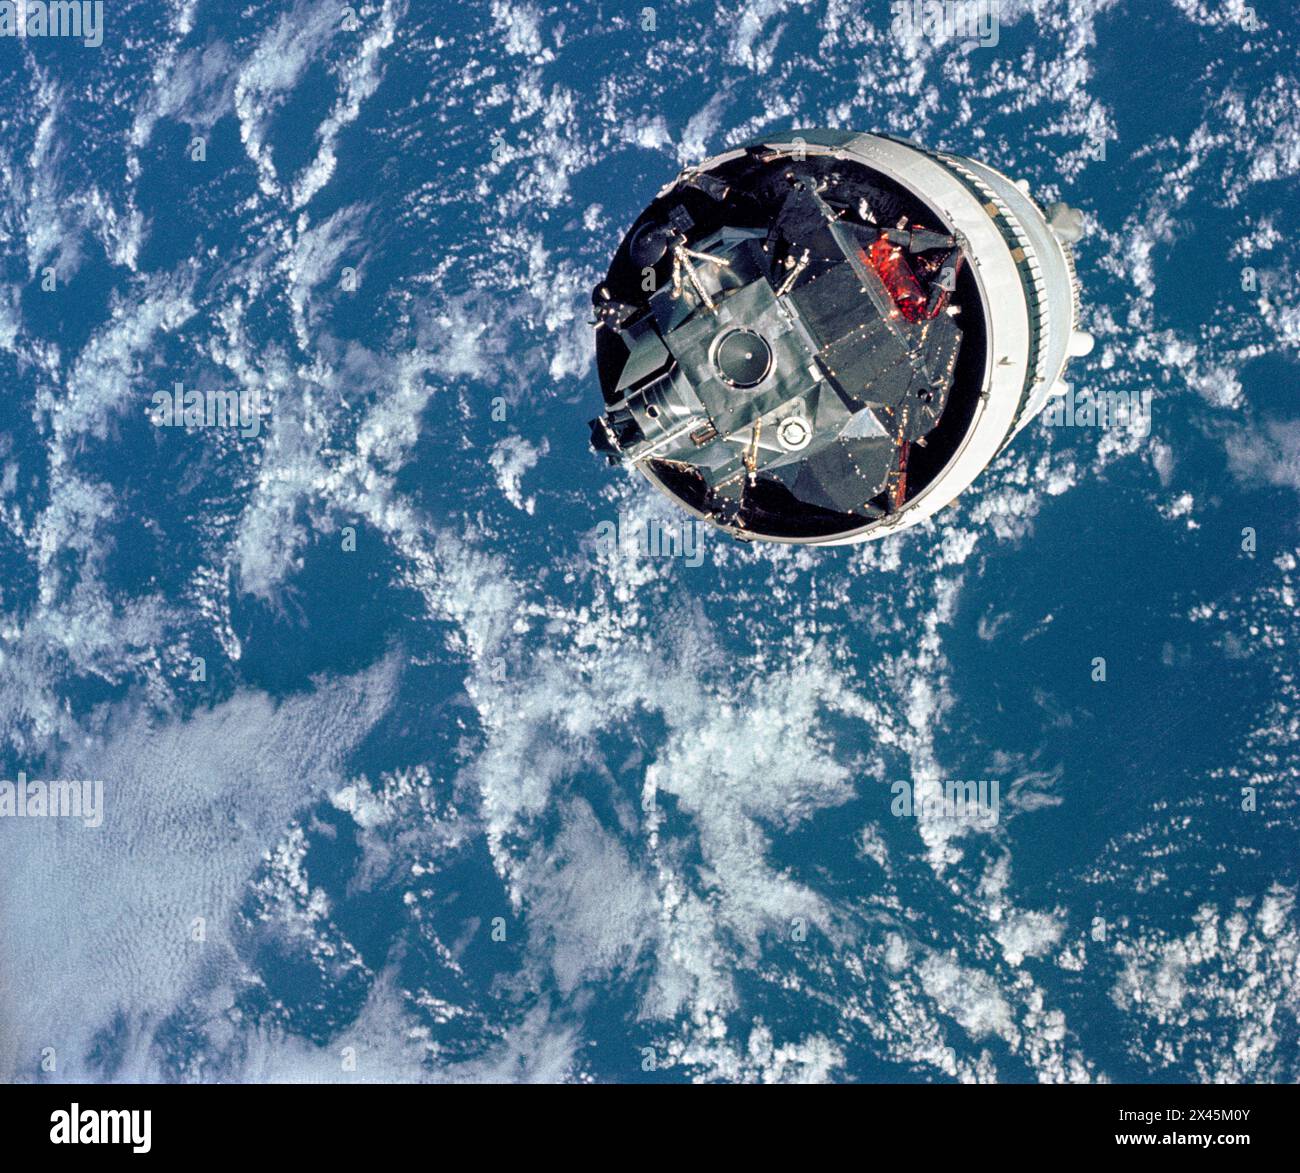 Lunar Module from a NASA Saturn V rocket seen in space with Earth in the background - 3rd March 1969 Stock Photo